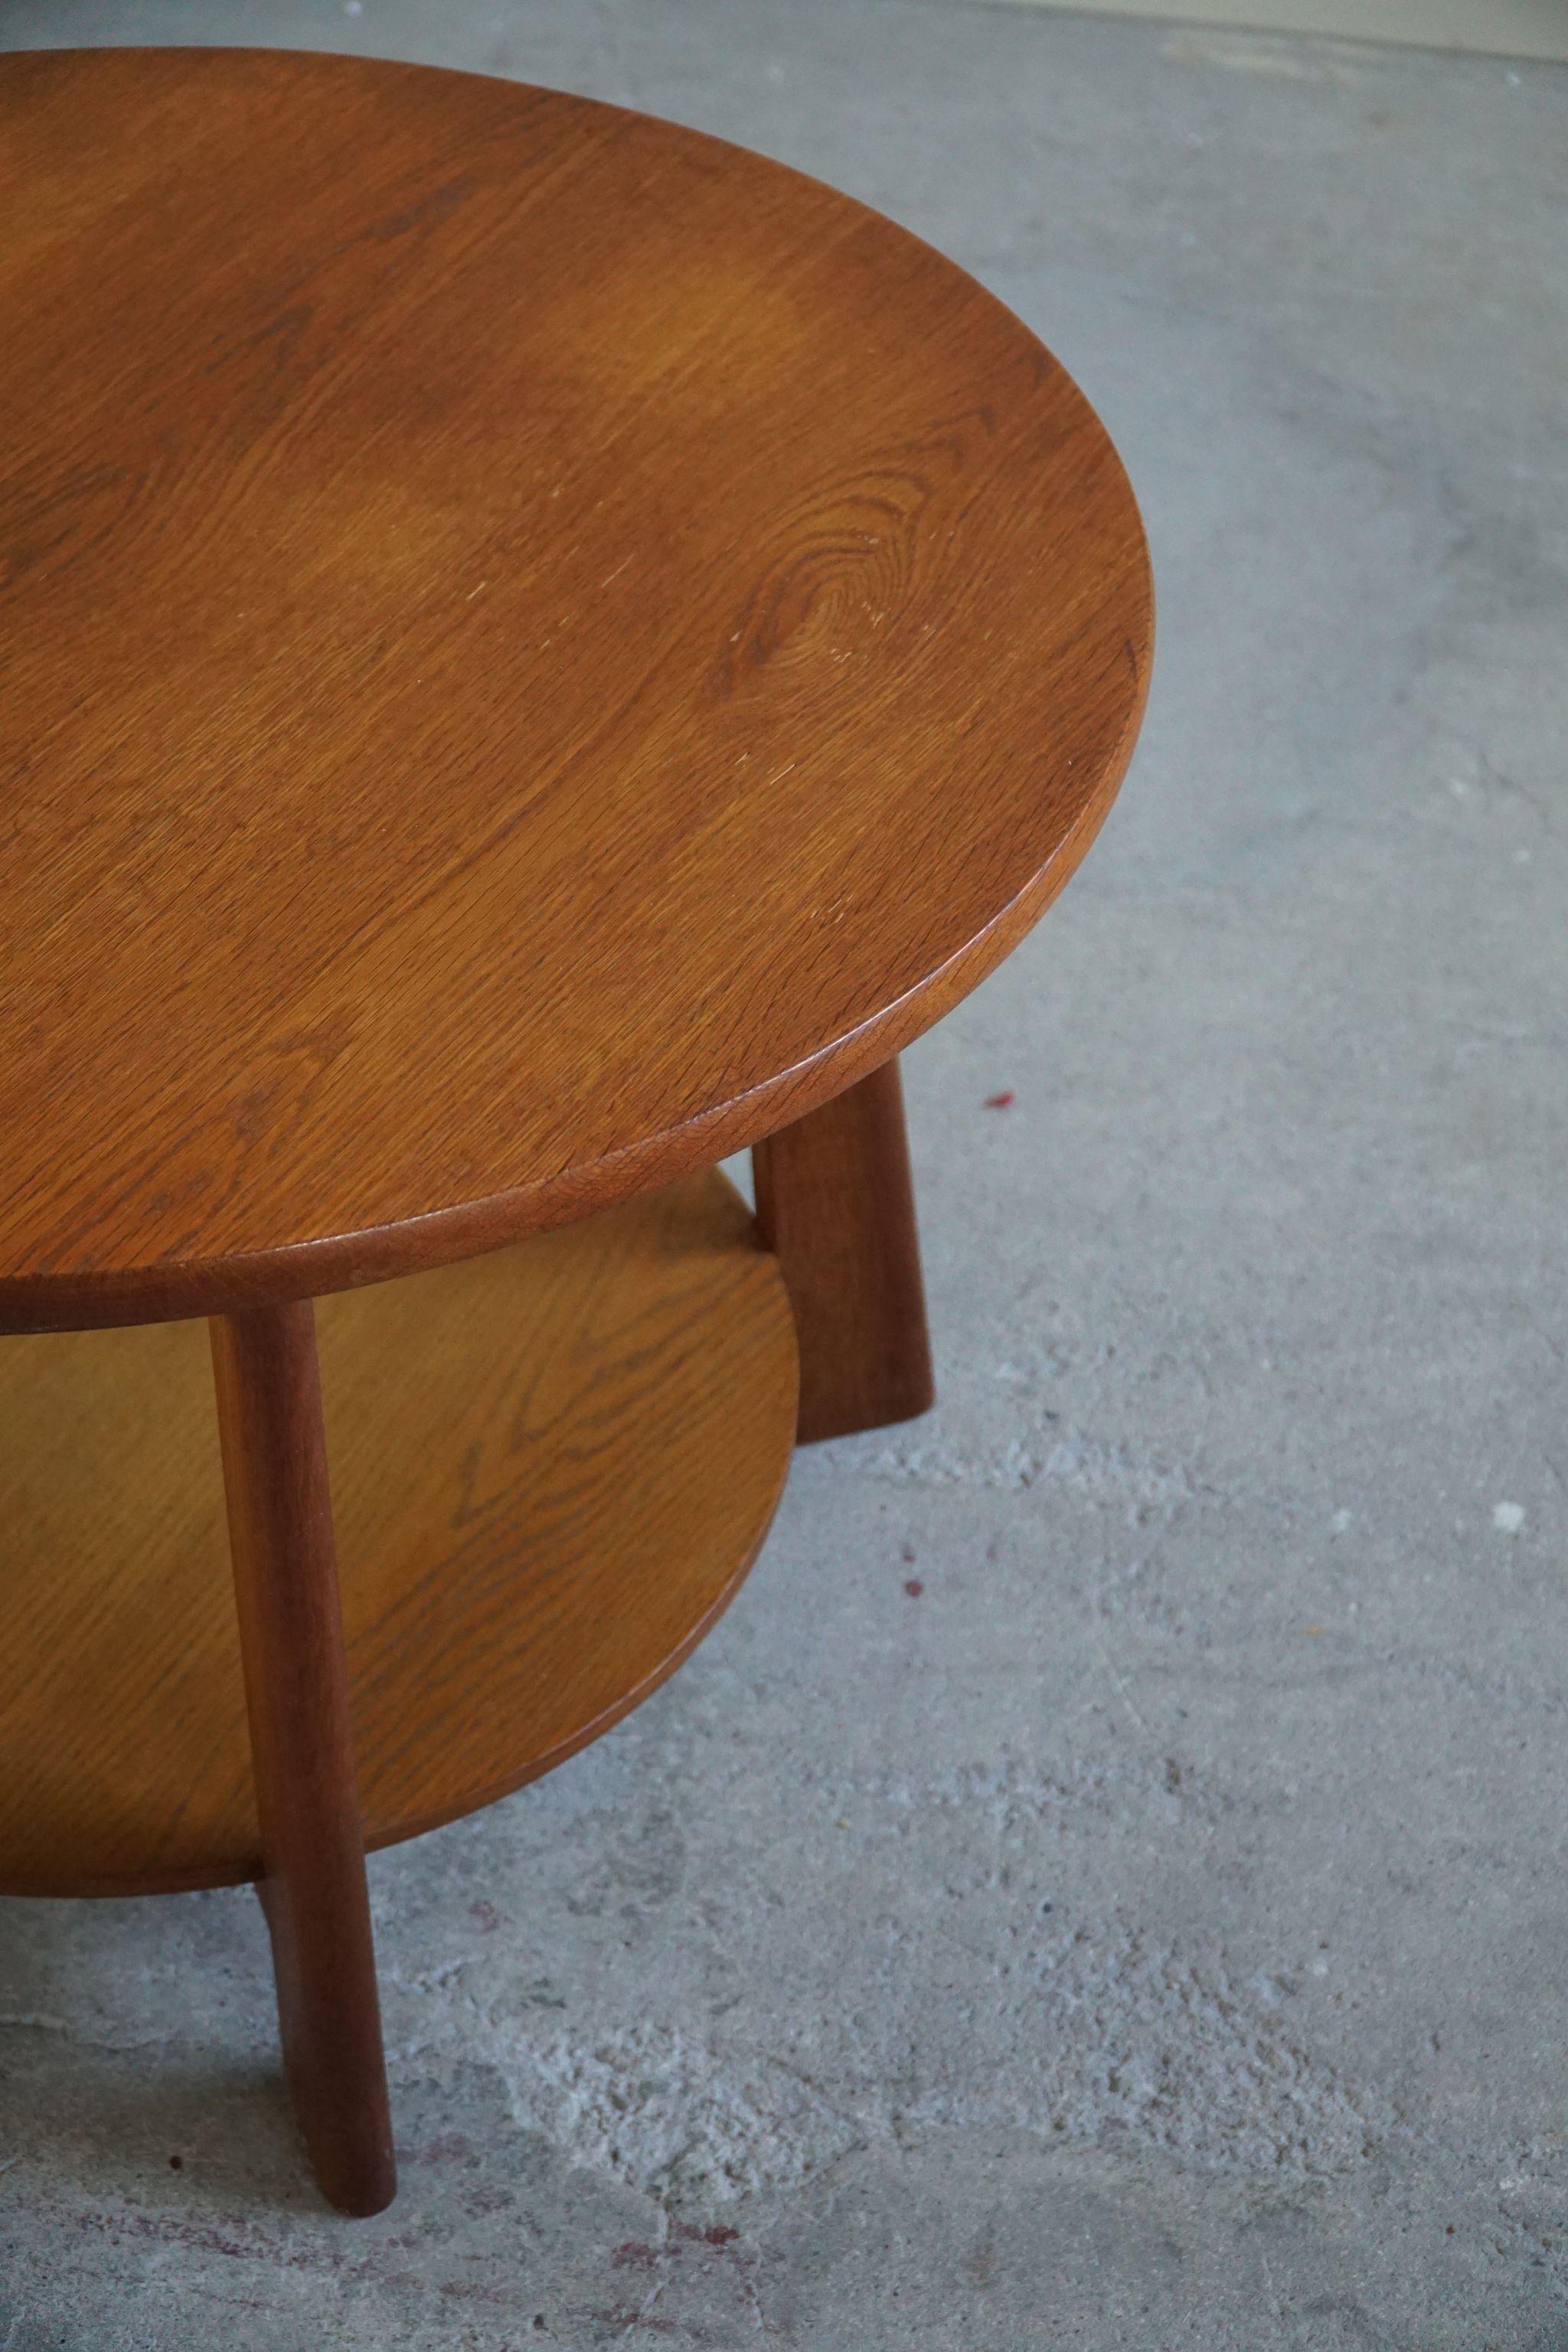 Otto Færge, Classic Round Side Table in Oak, Danish Modern, Made in 1940s 4